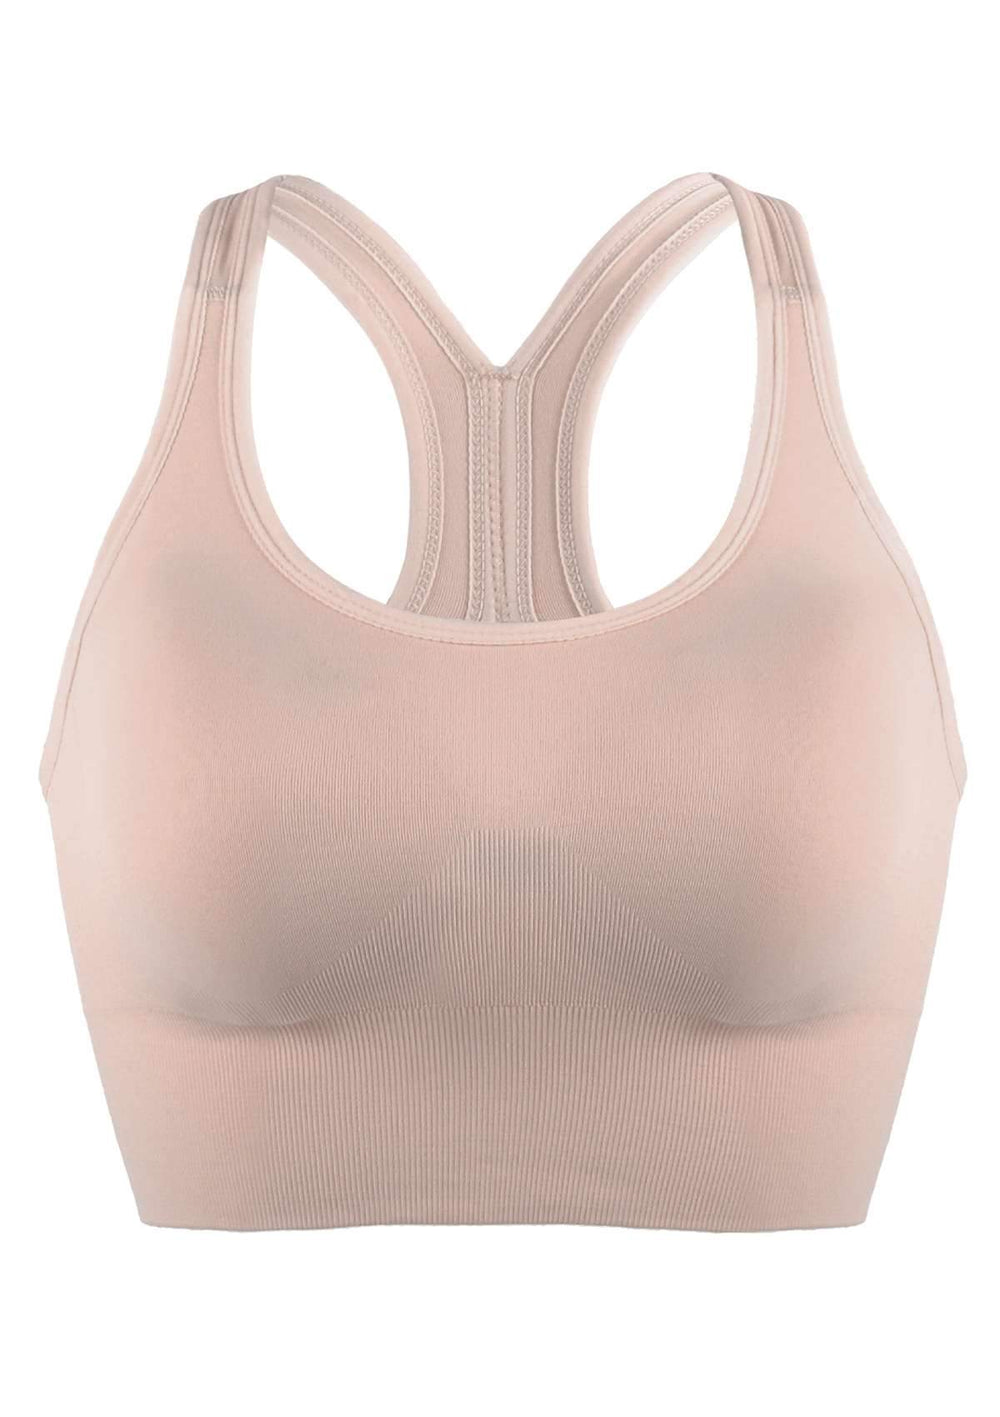 Casall Iconic Sports Bra A/B Cup Sort